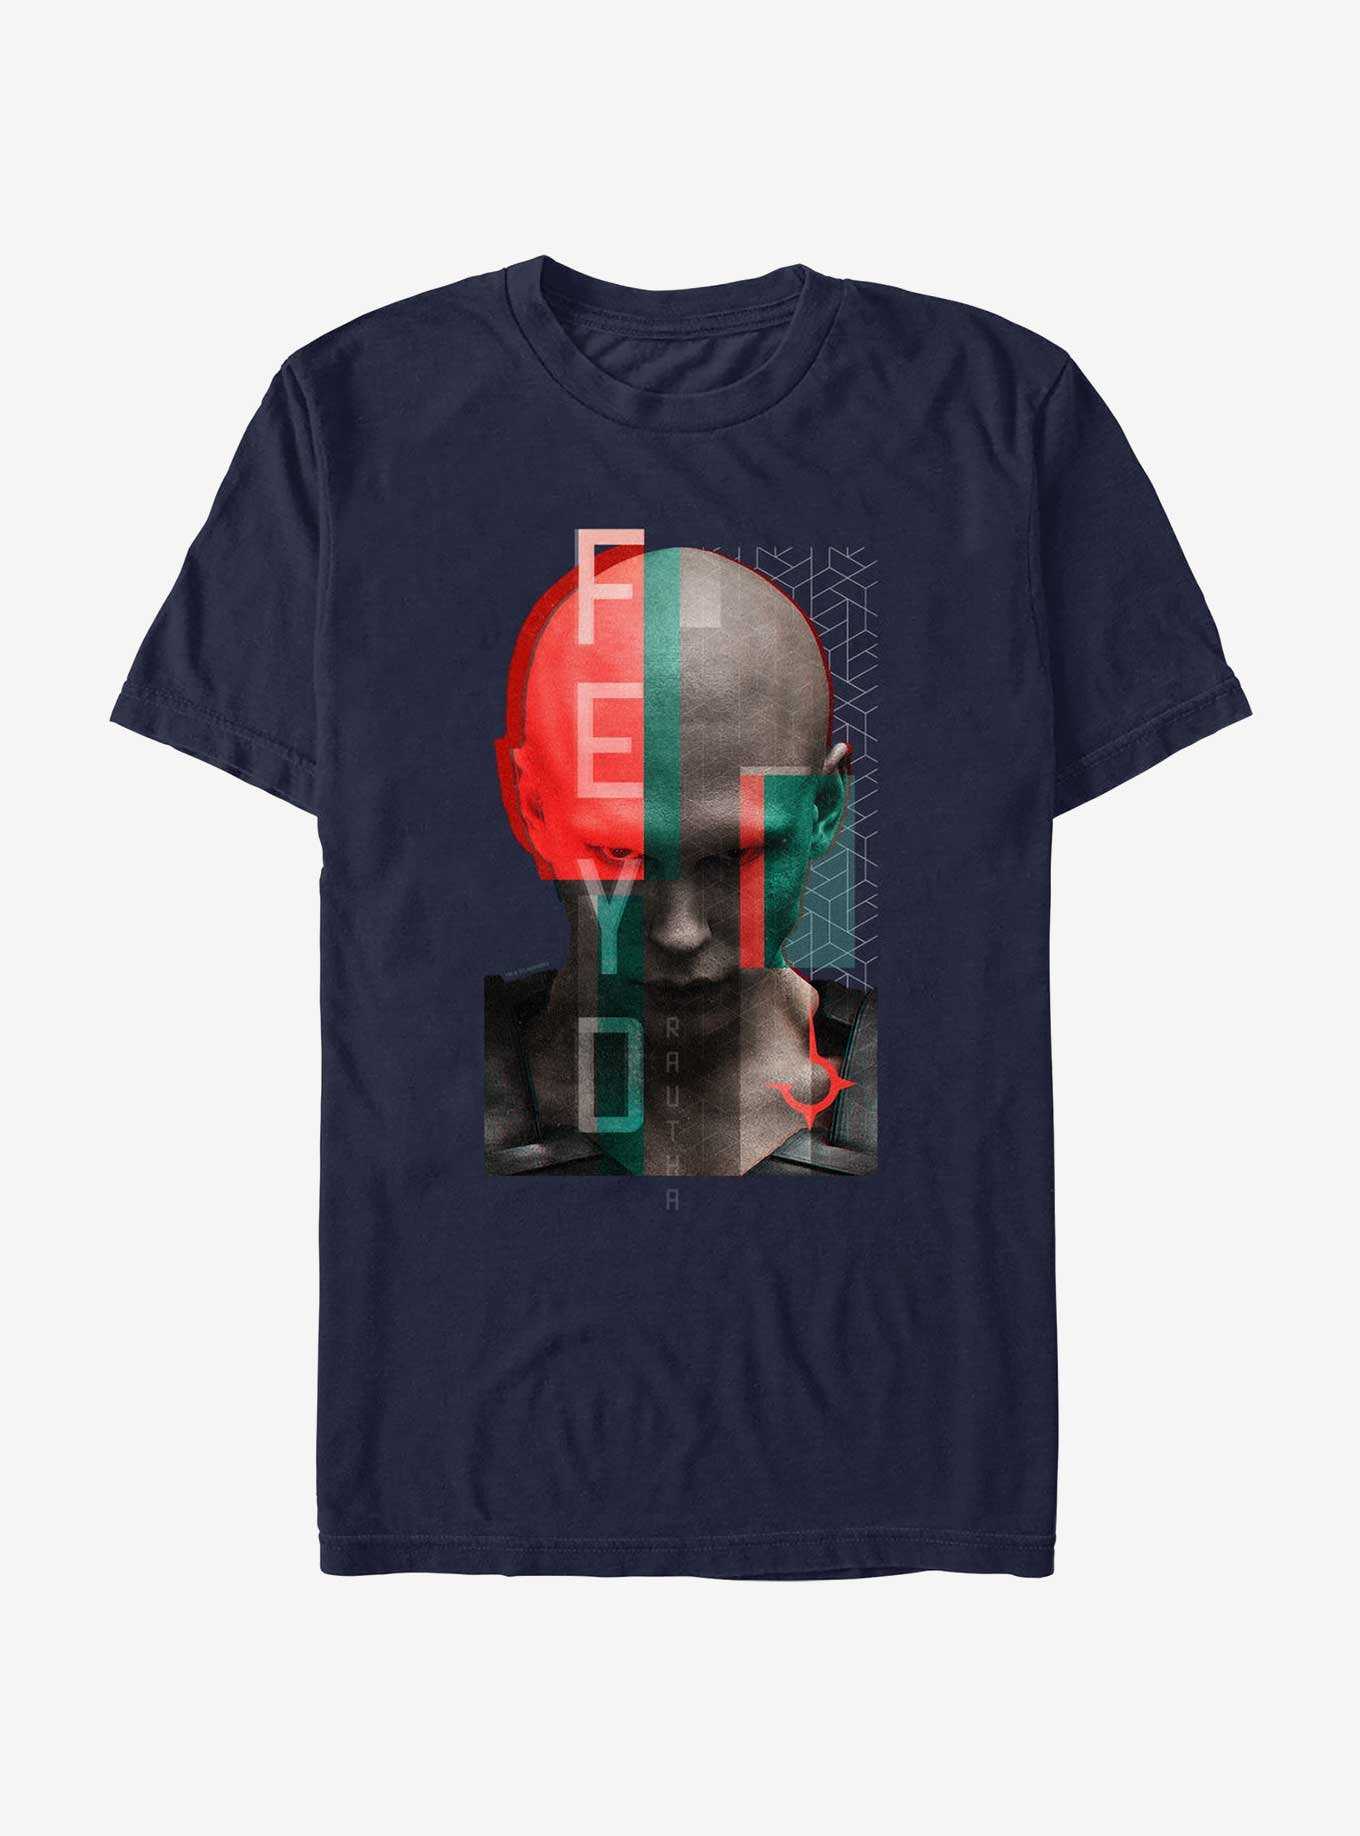 Dune: Part Two Feyd Bust T-Shirt, , hi-res